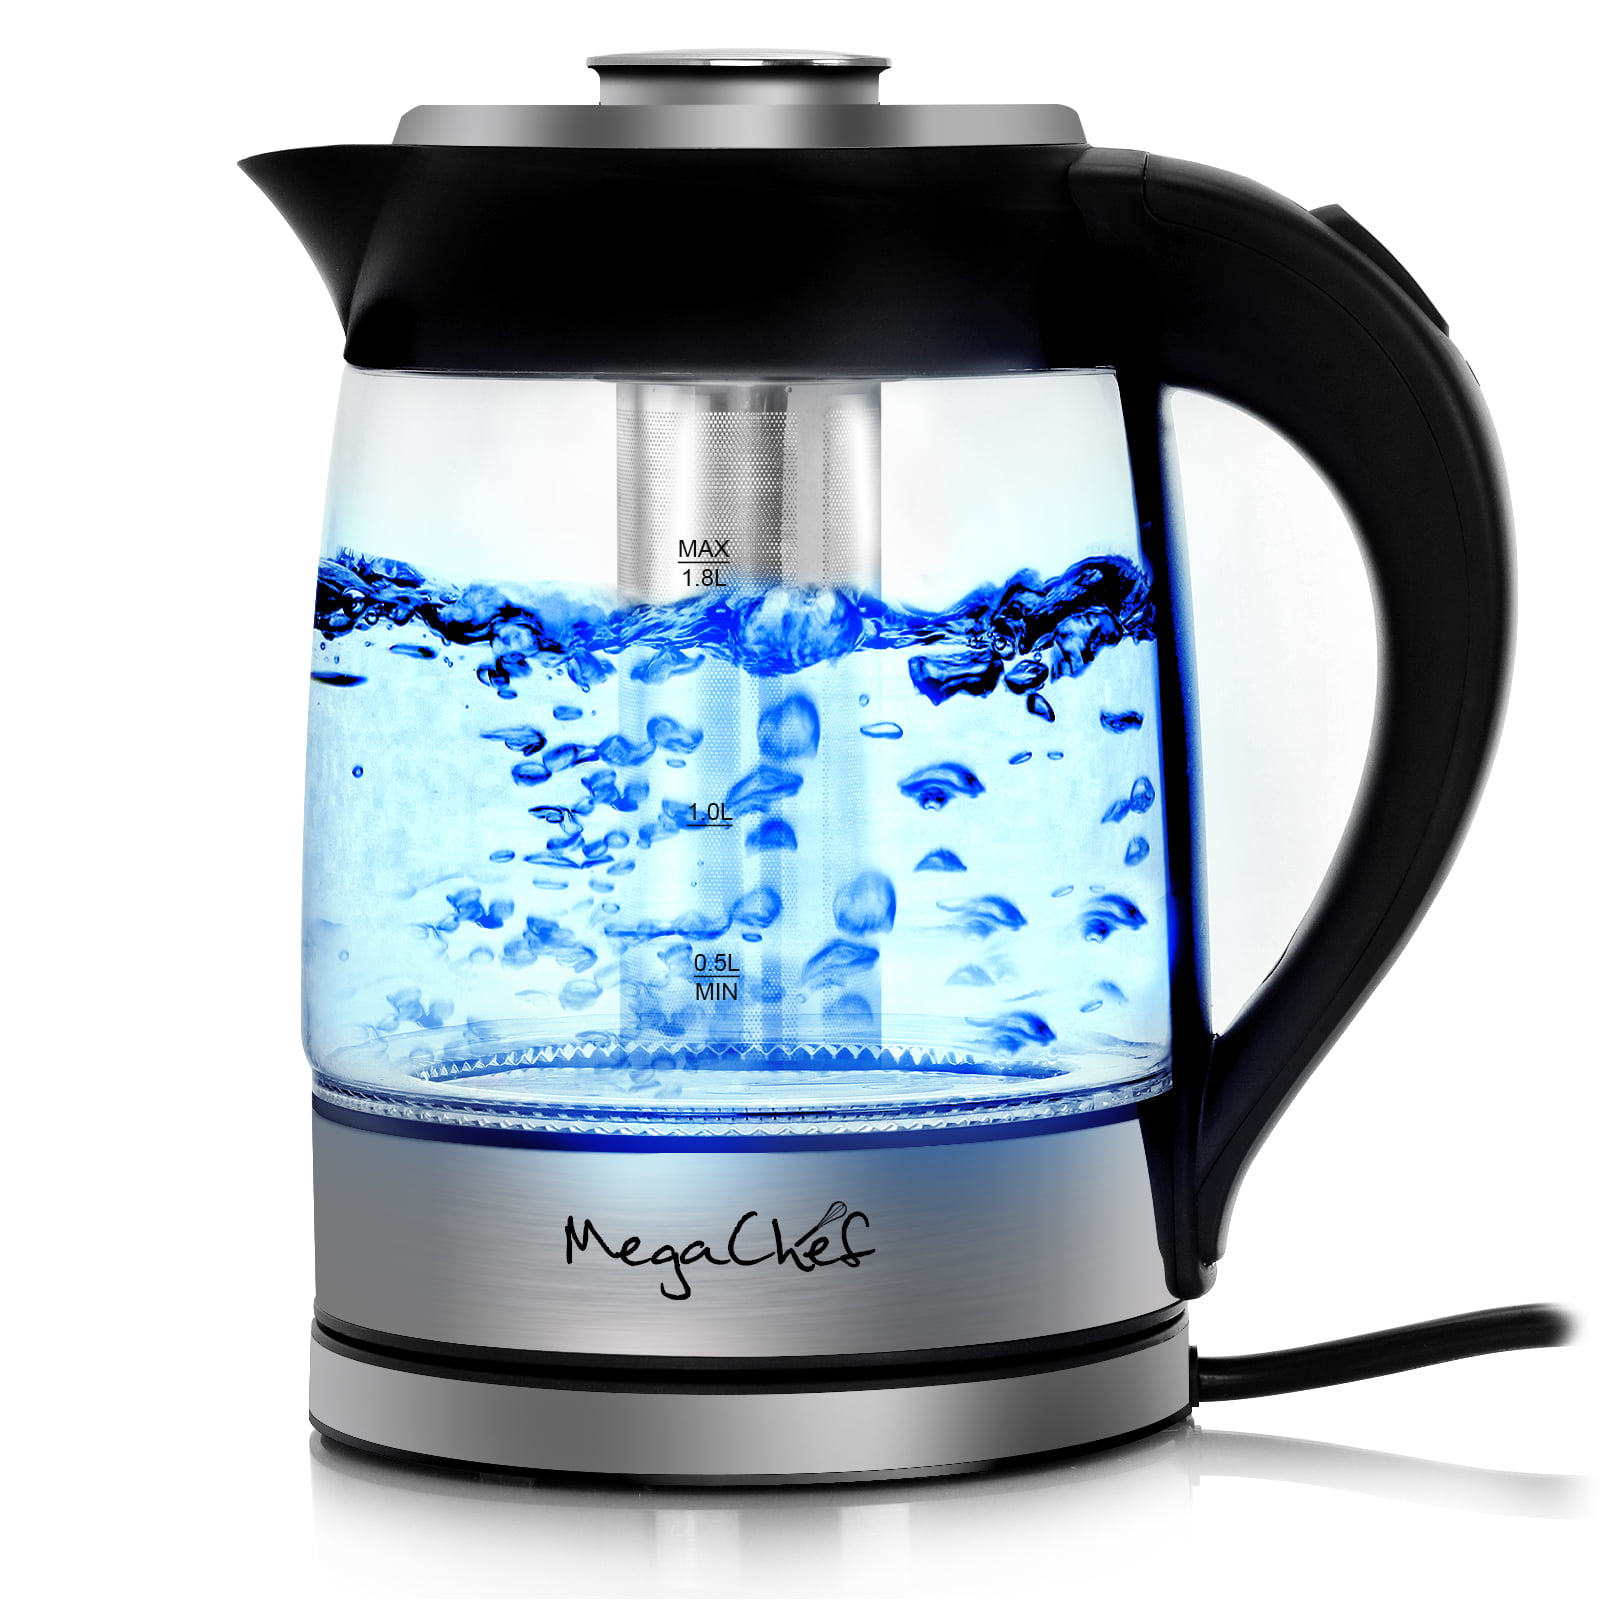 MegaChef 1.8 Liter Cordless Glass and Stainless Steel Electric Tea Kettle with Tea Infuser - image 1 of 2